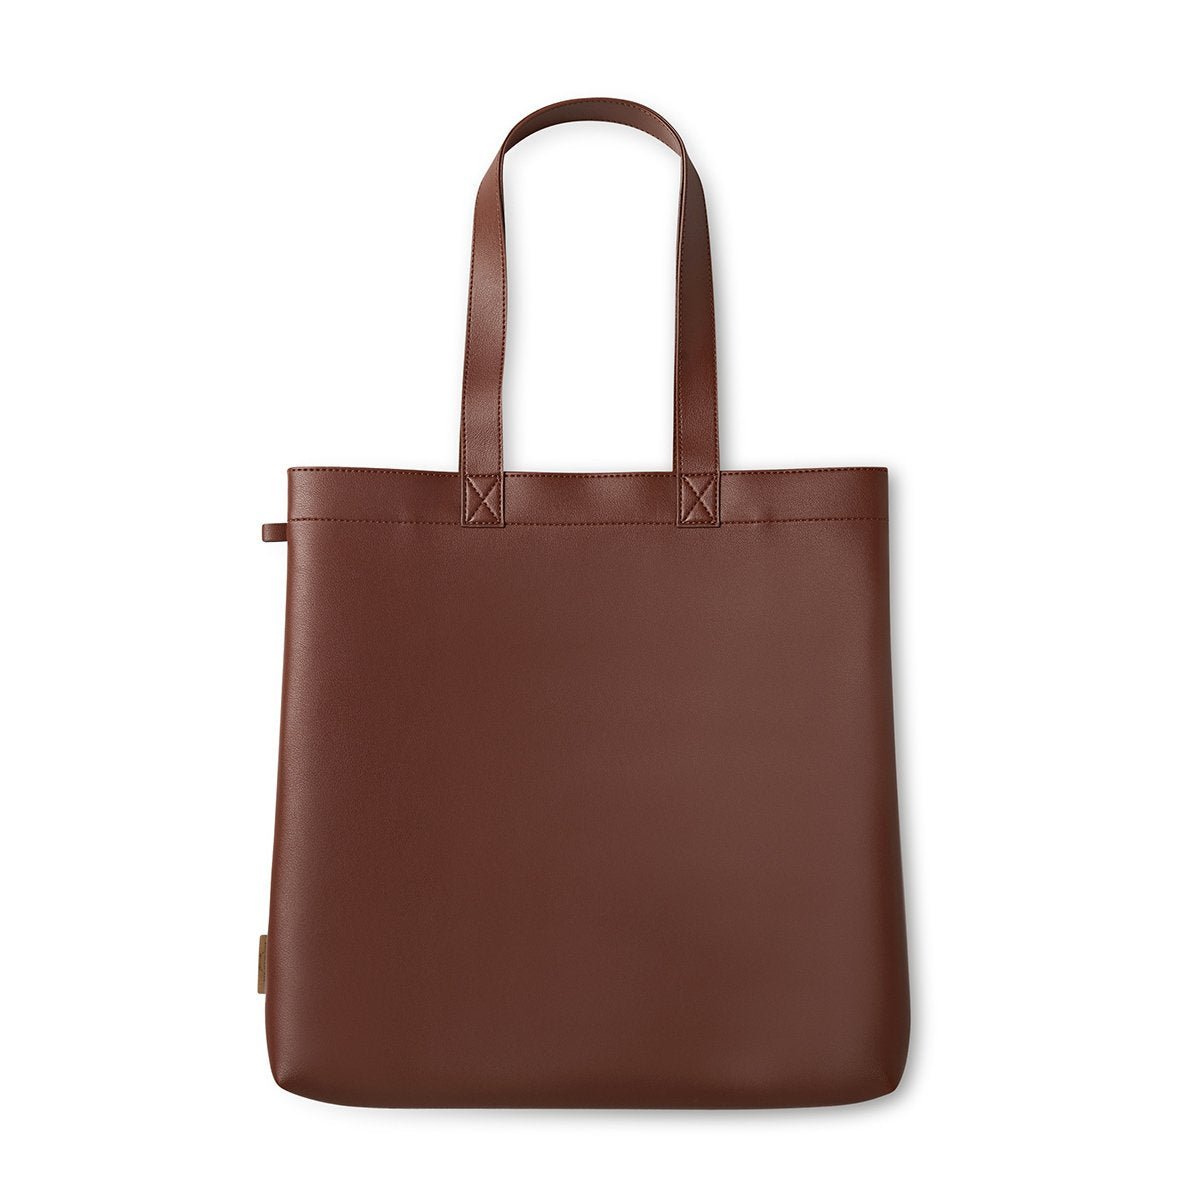 BROWN Faux Leather Tote Bag